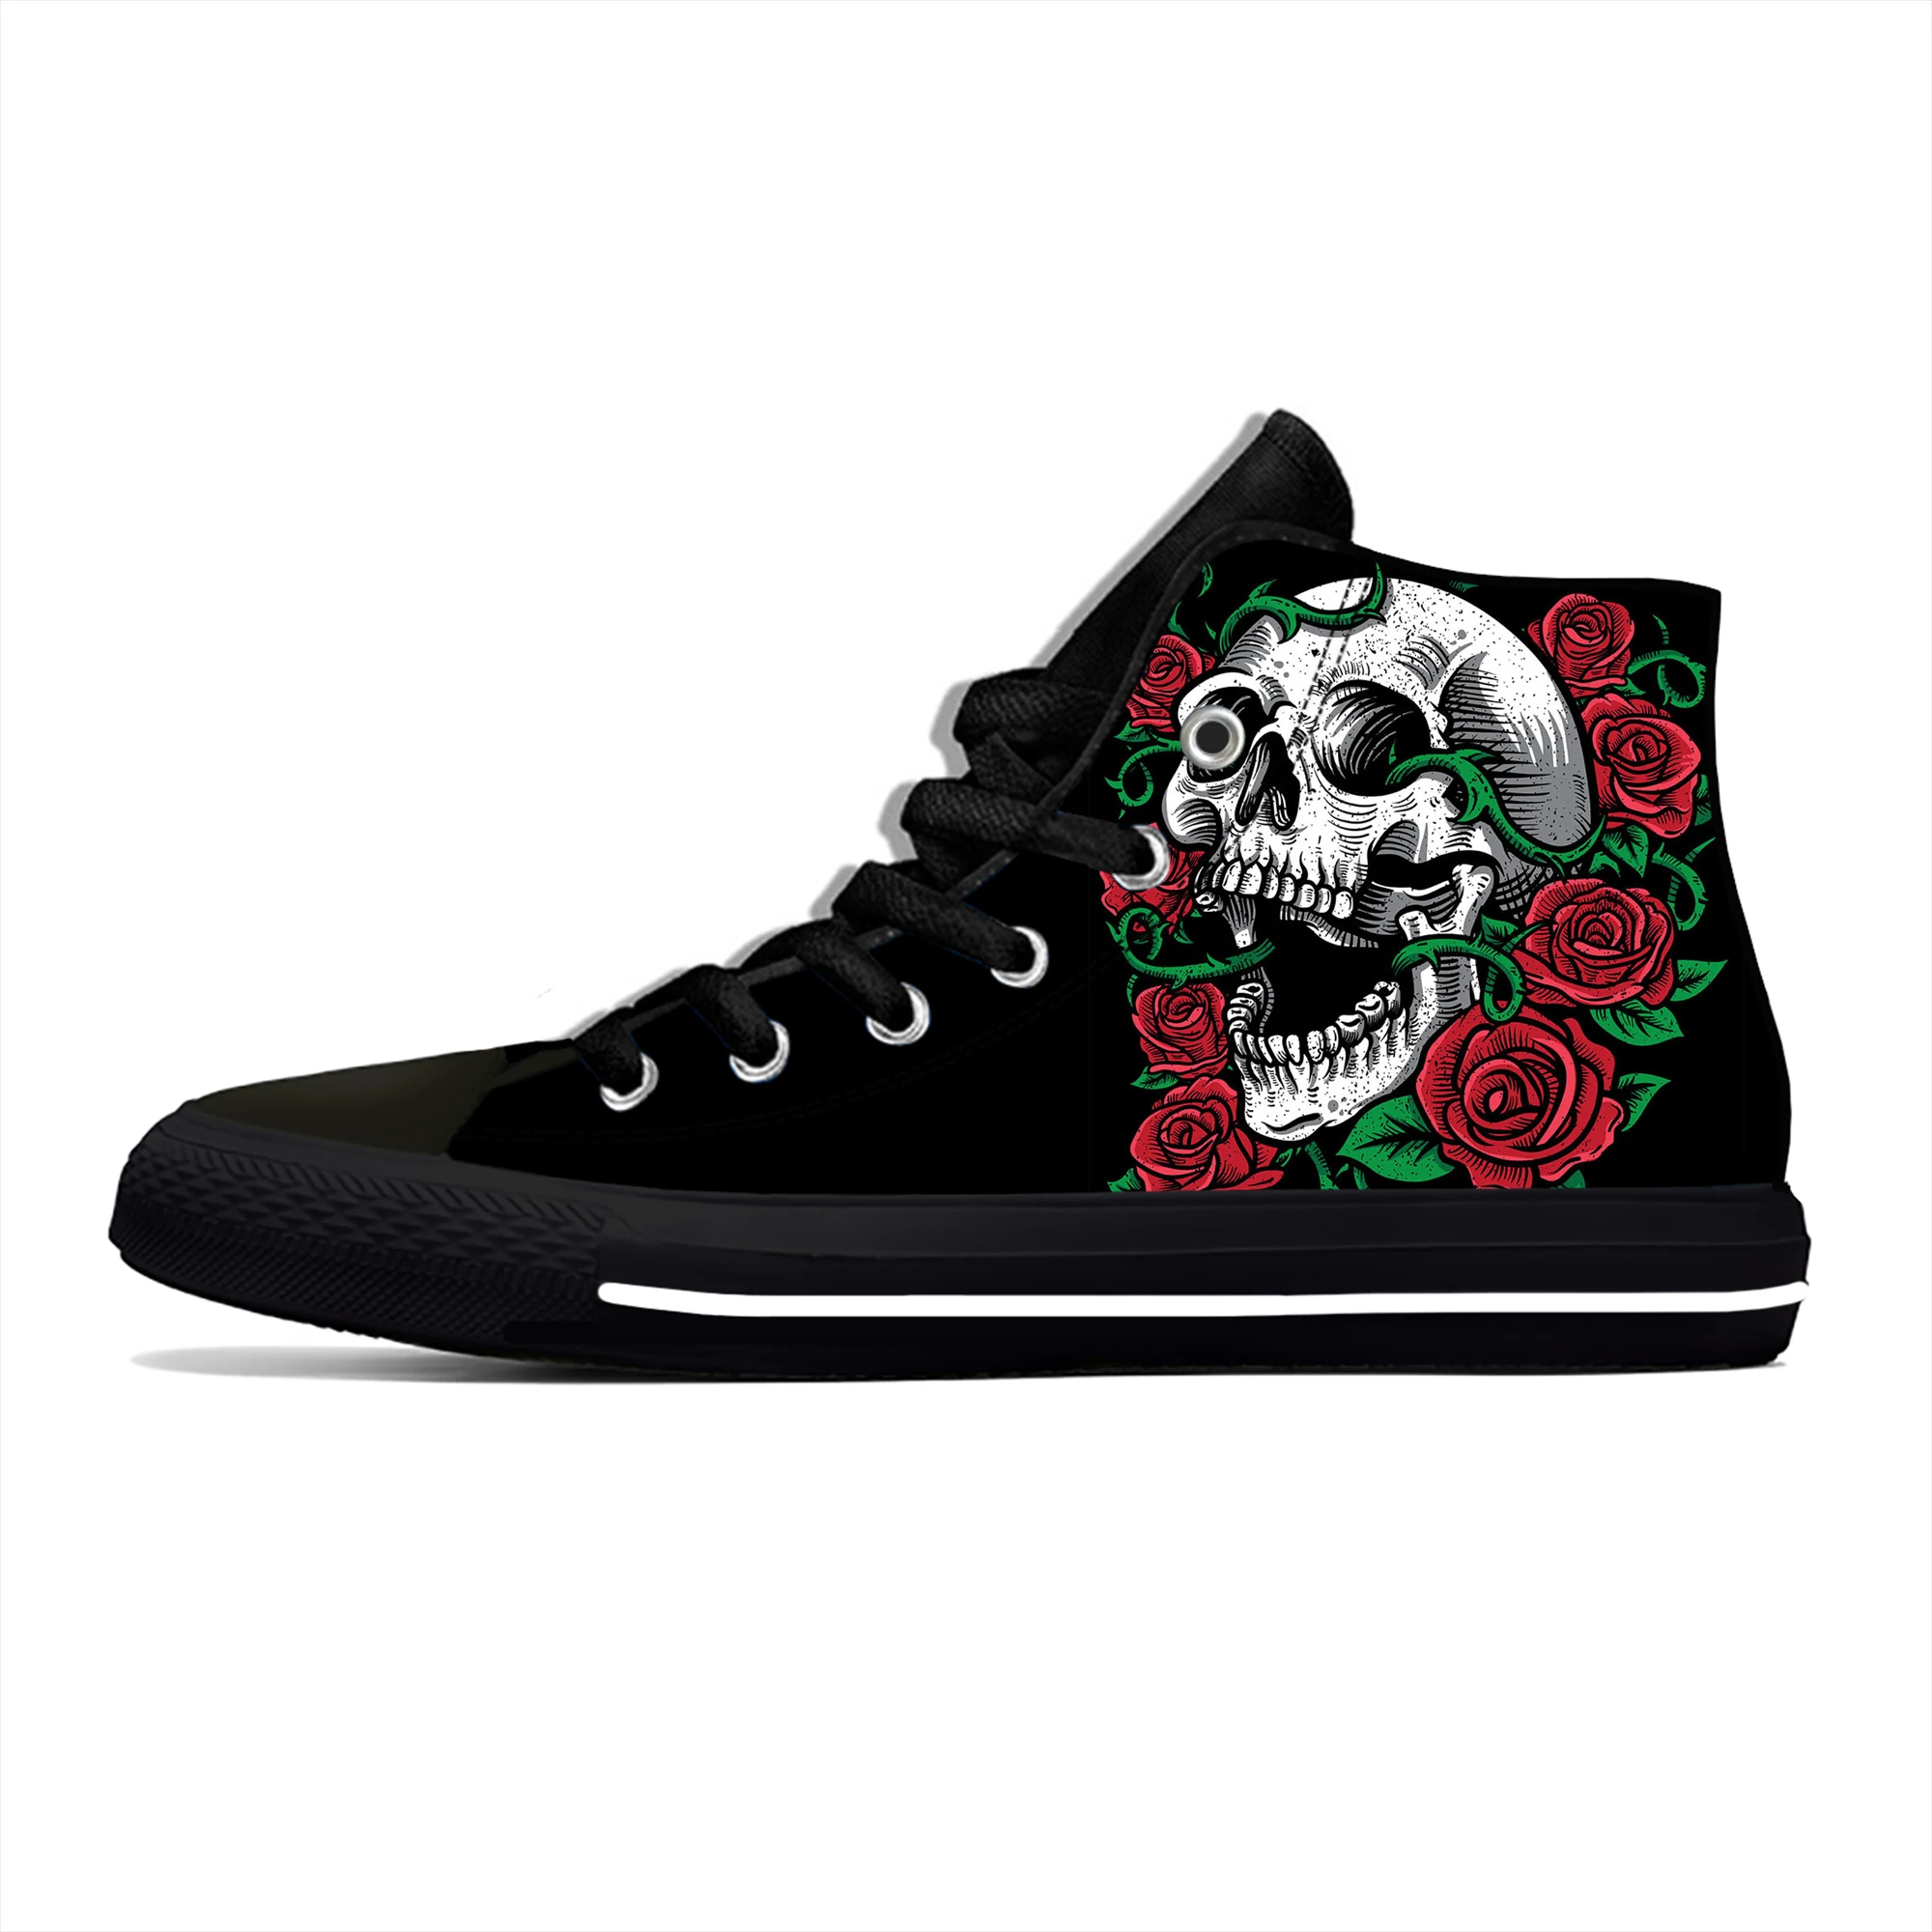 

Skulls Roses High Top Sneakers Mens Womens Teenager Casual Shoes Canvas Running Shoes 3D Printed Breathable Lightweight shoe